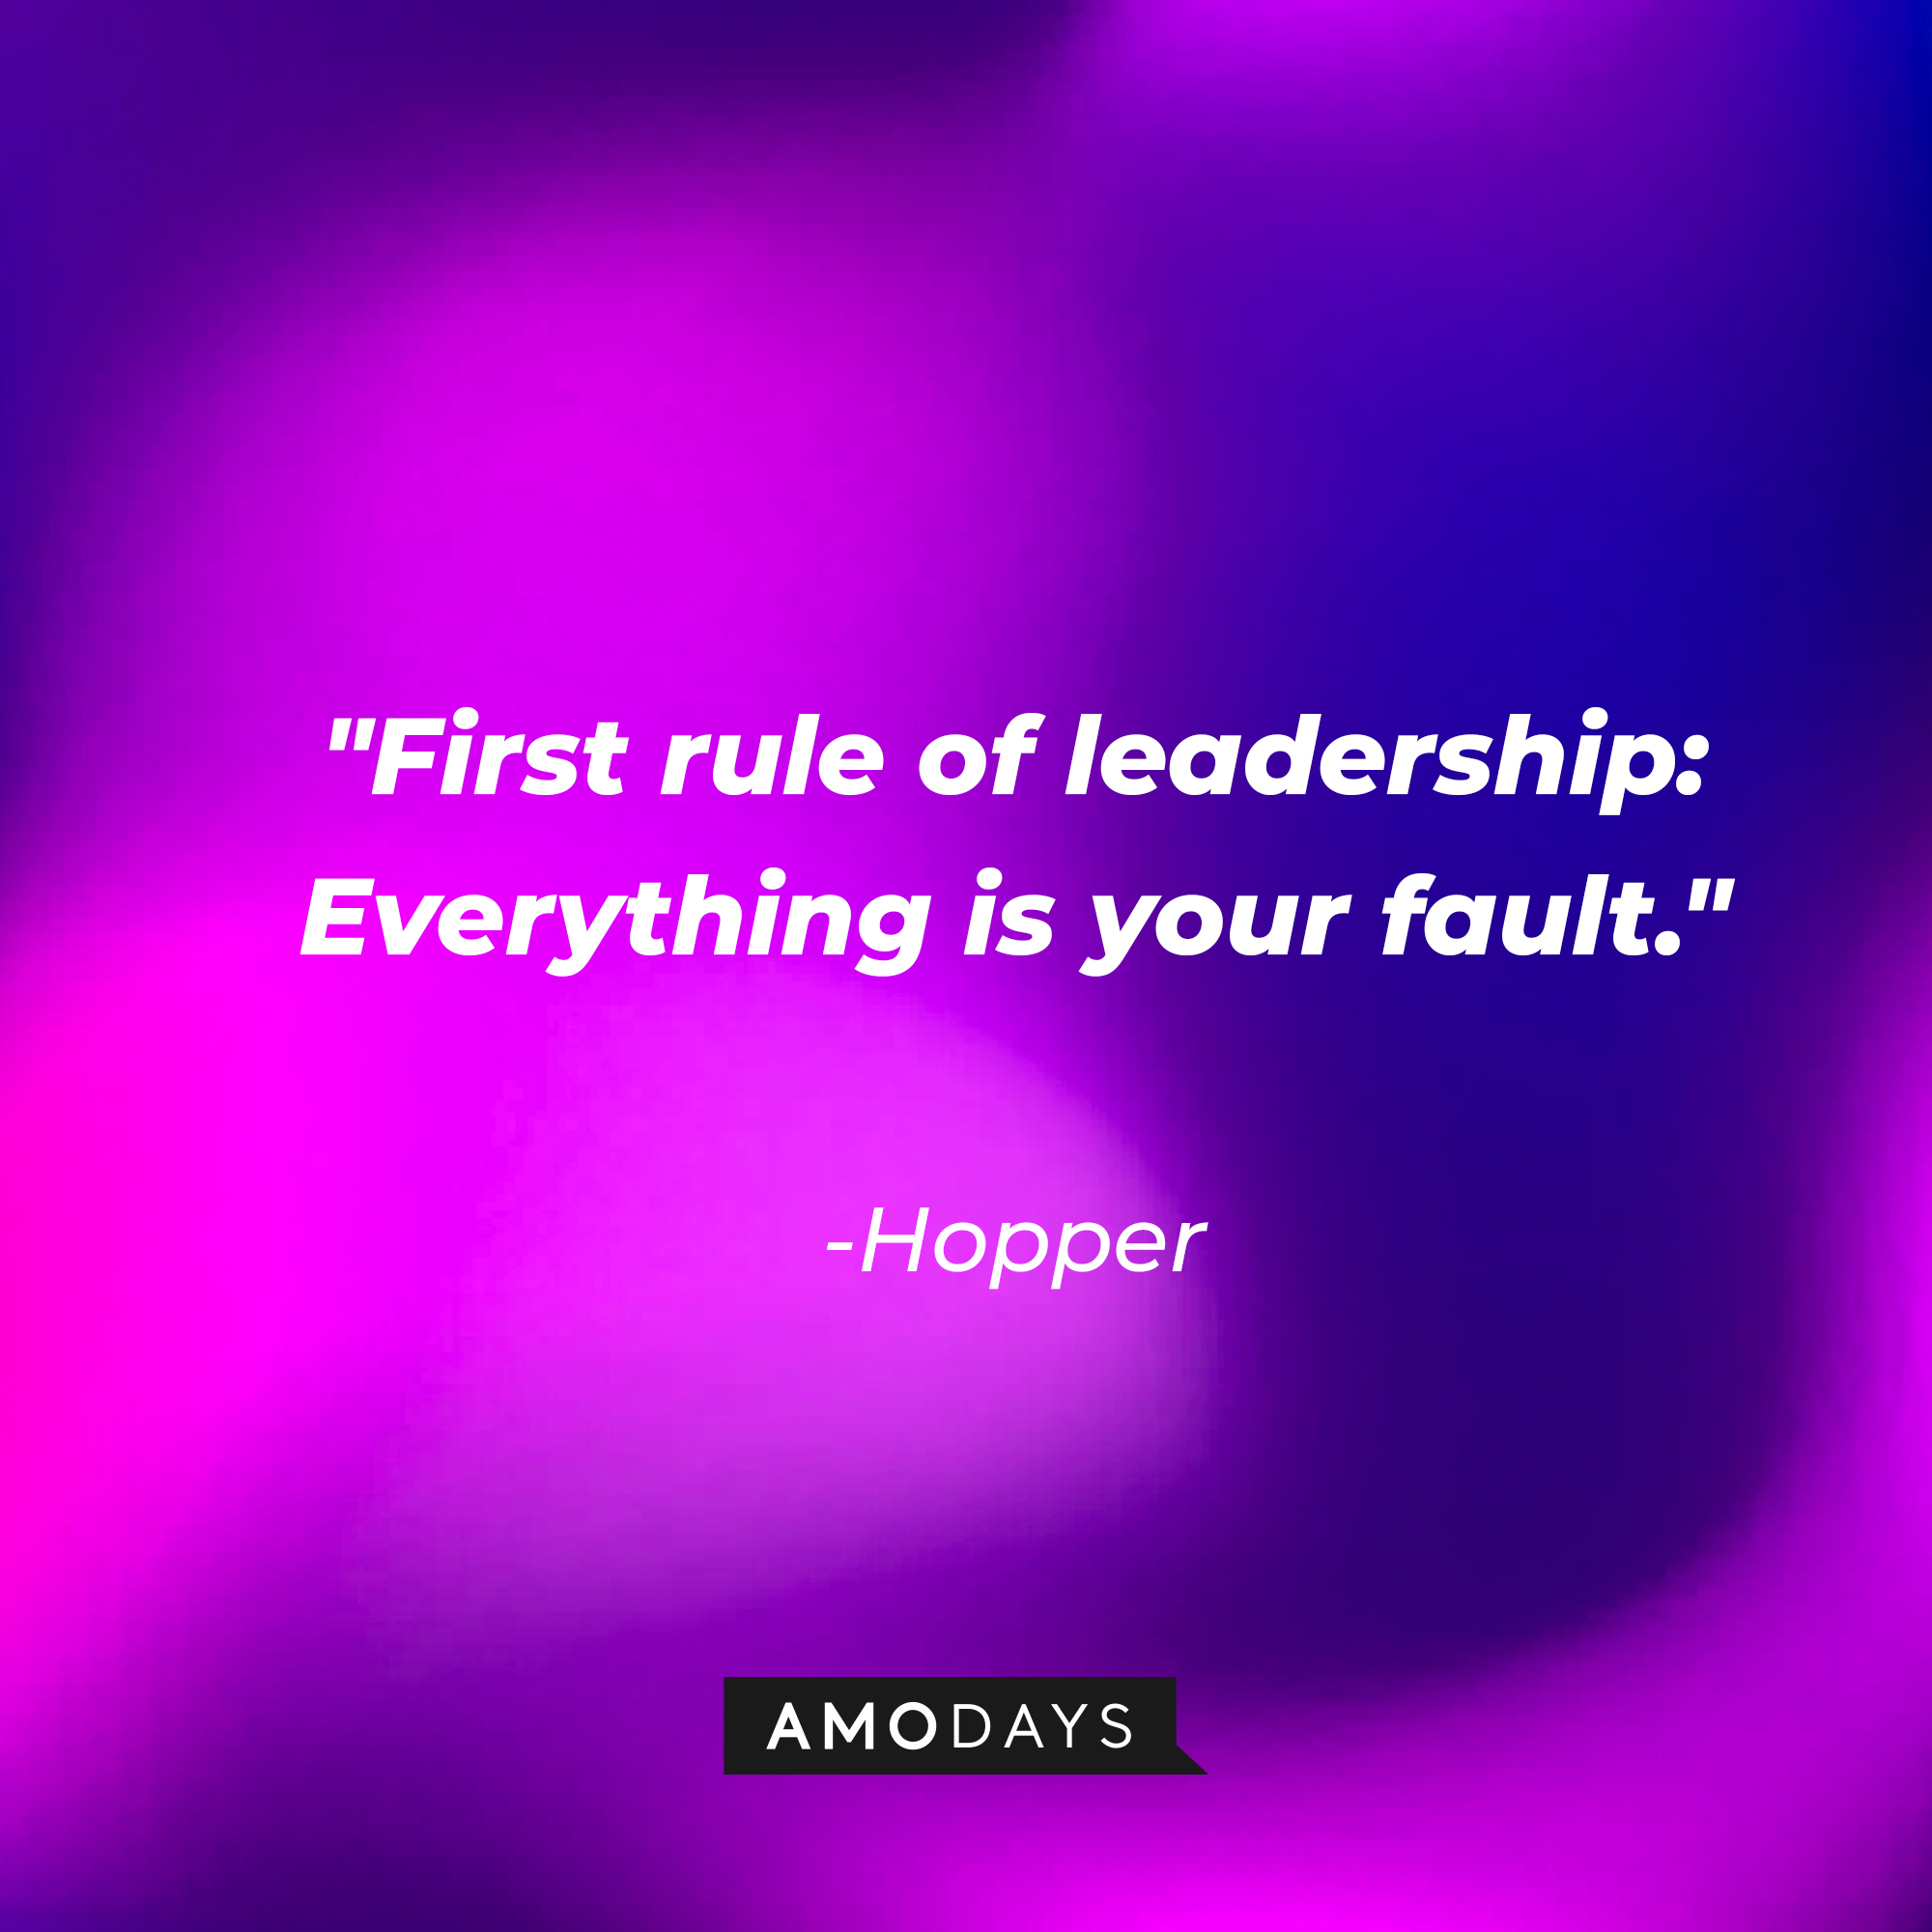 Hopper's quote: "First rule of leadership: Everything is your fault." | Source: AmoDays